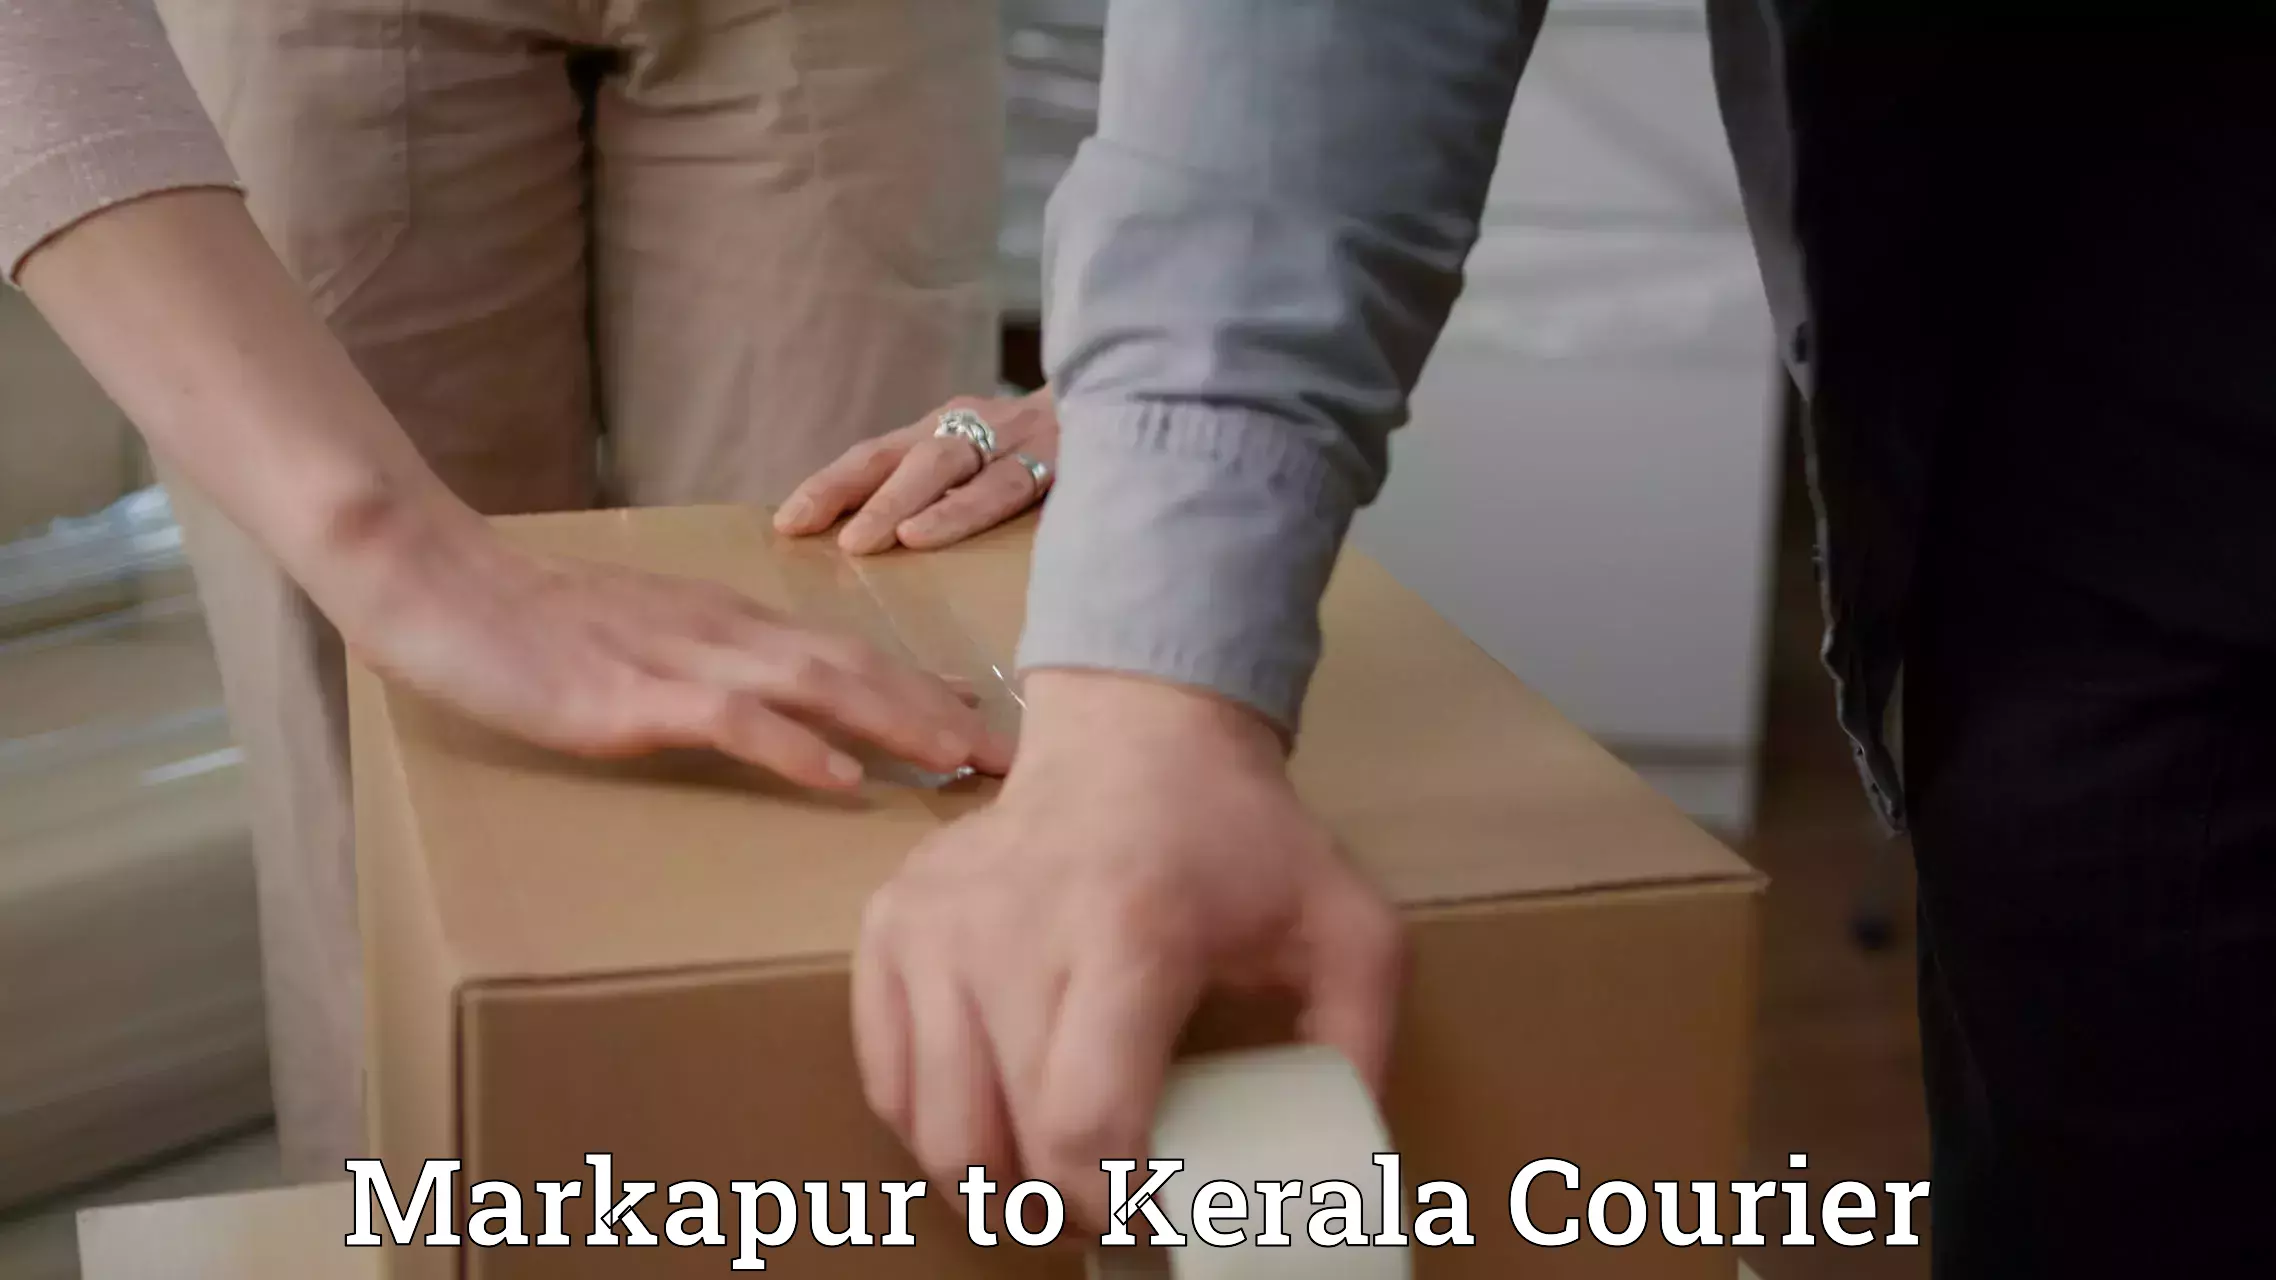 On-call courier service Markapur to Kochi